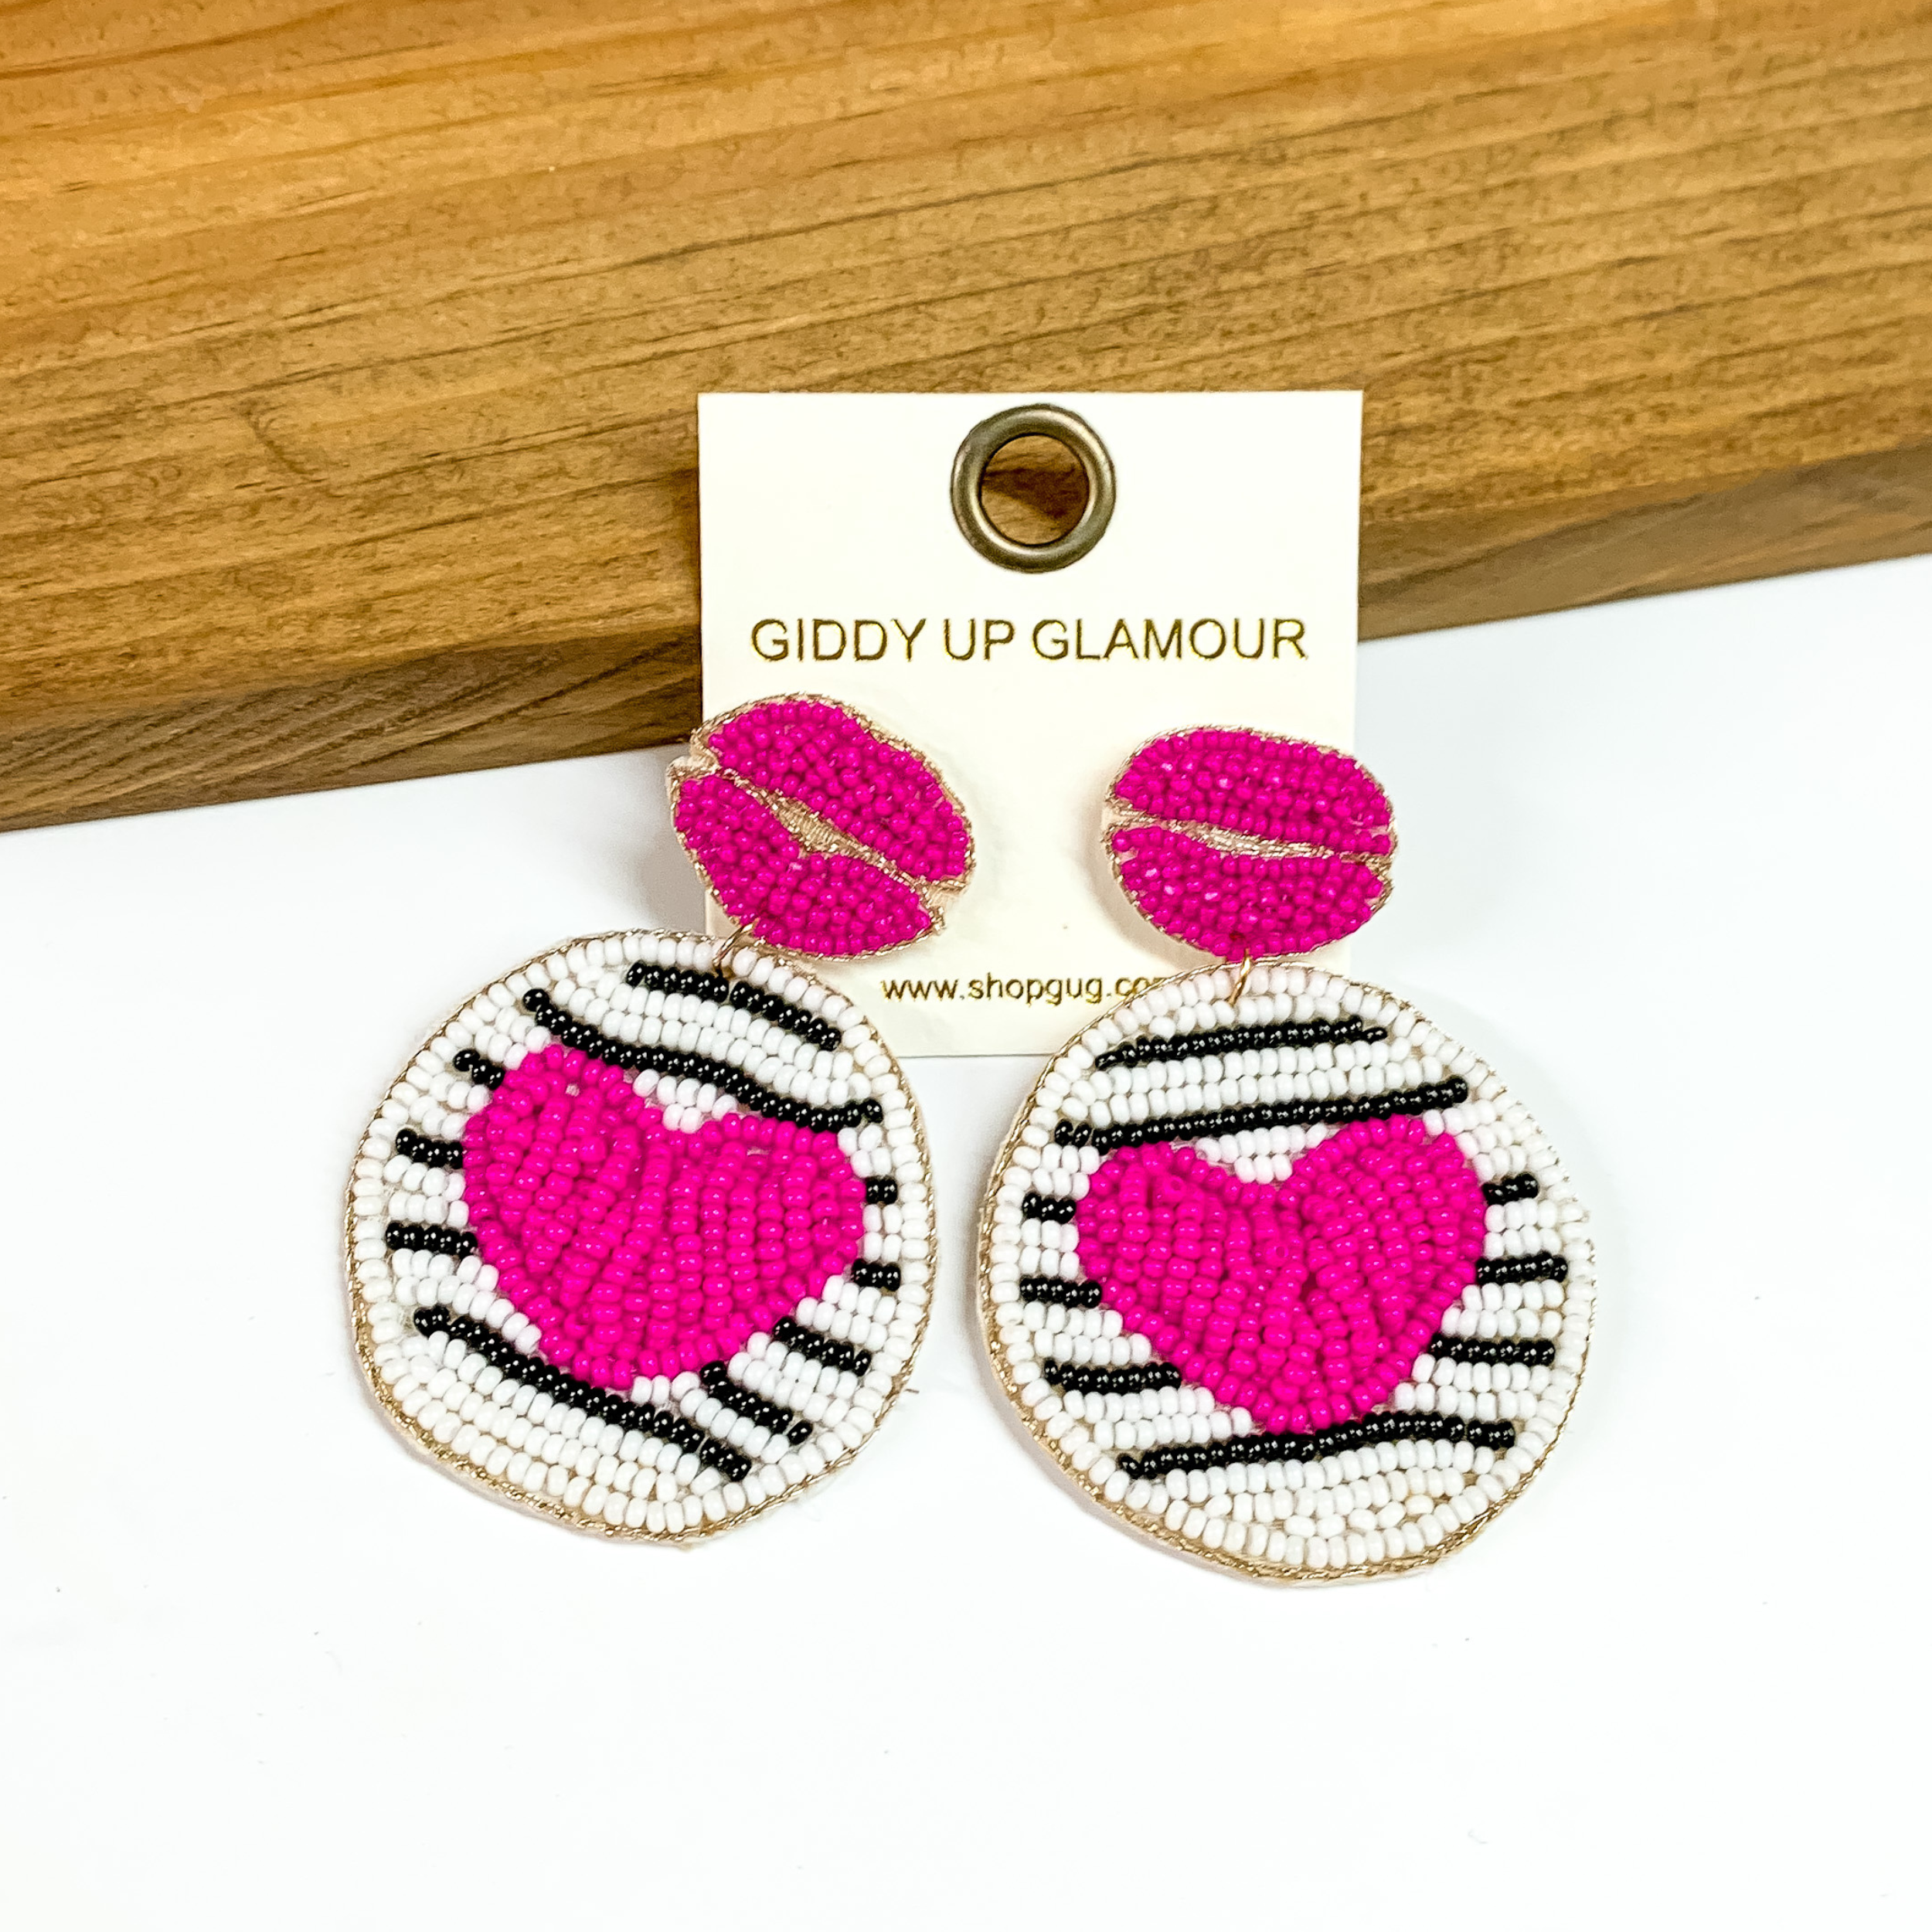 The cutest heart and lips seedbead earrings with post backs. The posts are hot pink lips made from seedbeads and the bottom part of the earring is white and black stripe with hot pink hearts in the middle. The earrings are perfect for Valentine's Day. The earrings are placed on a white and wood background.